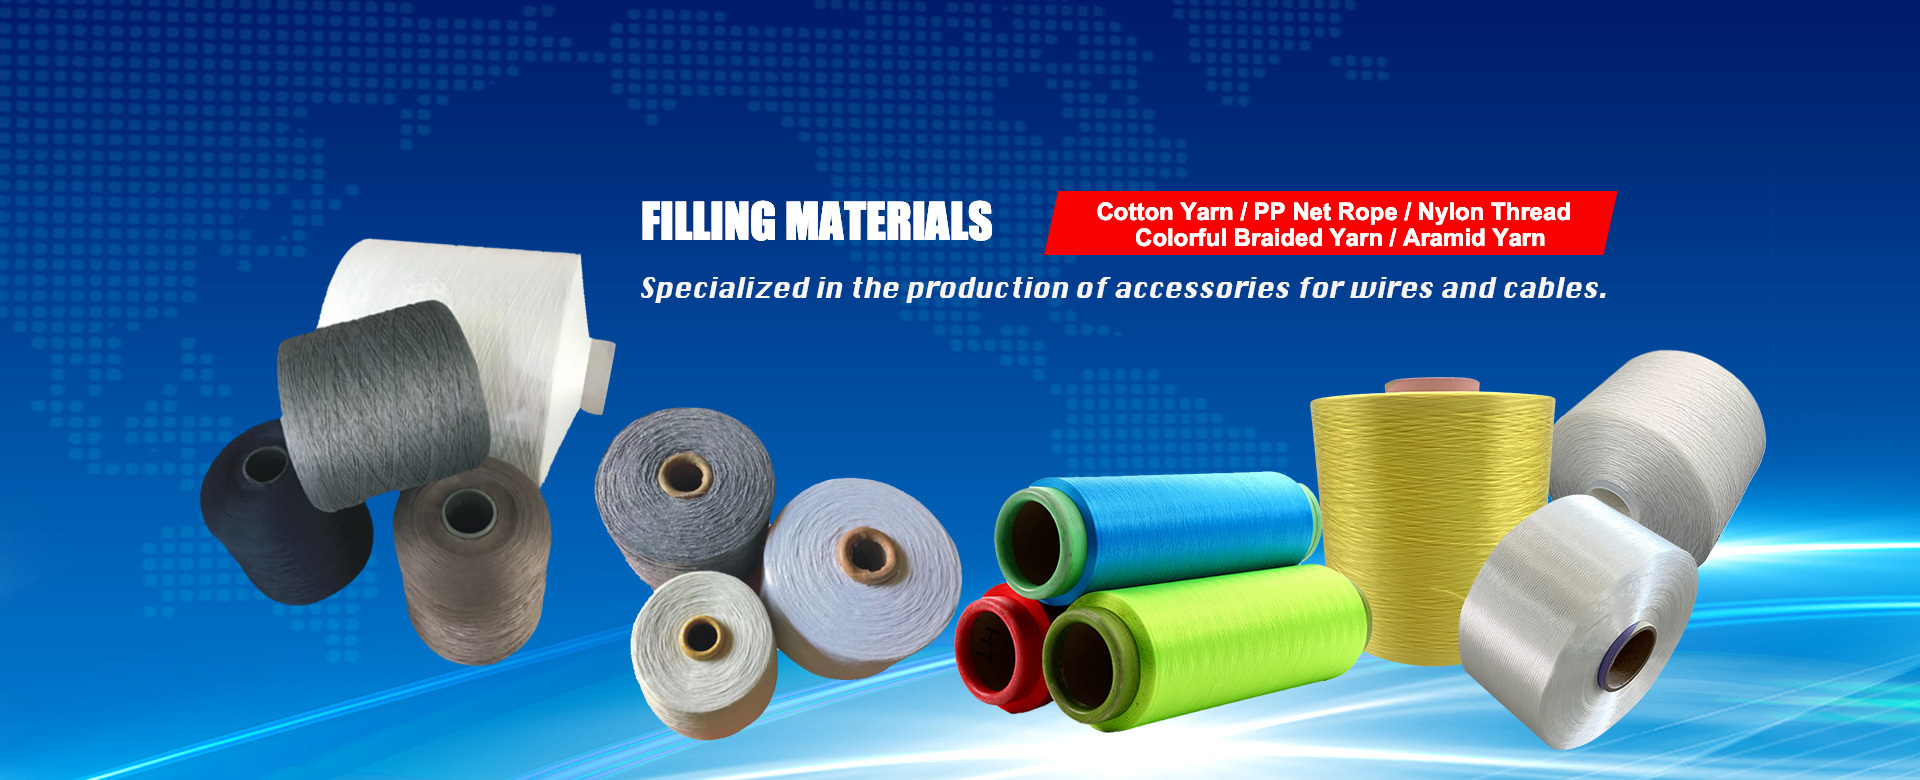 Huizhou Yuhua Wire and Cable Materials Co., Ltd